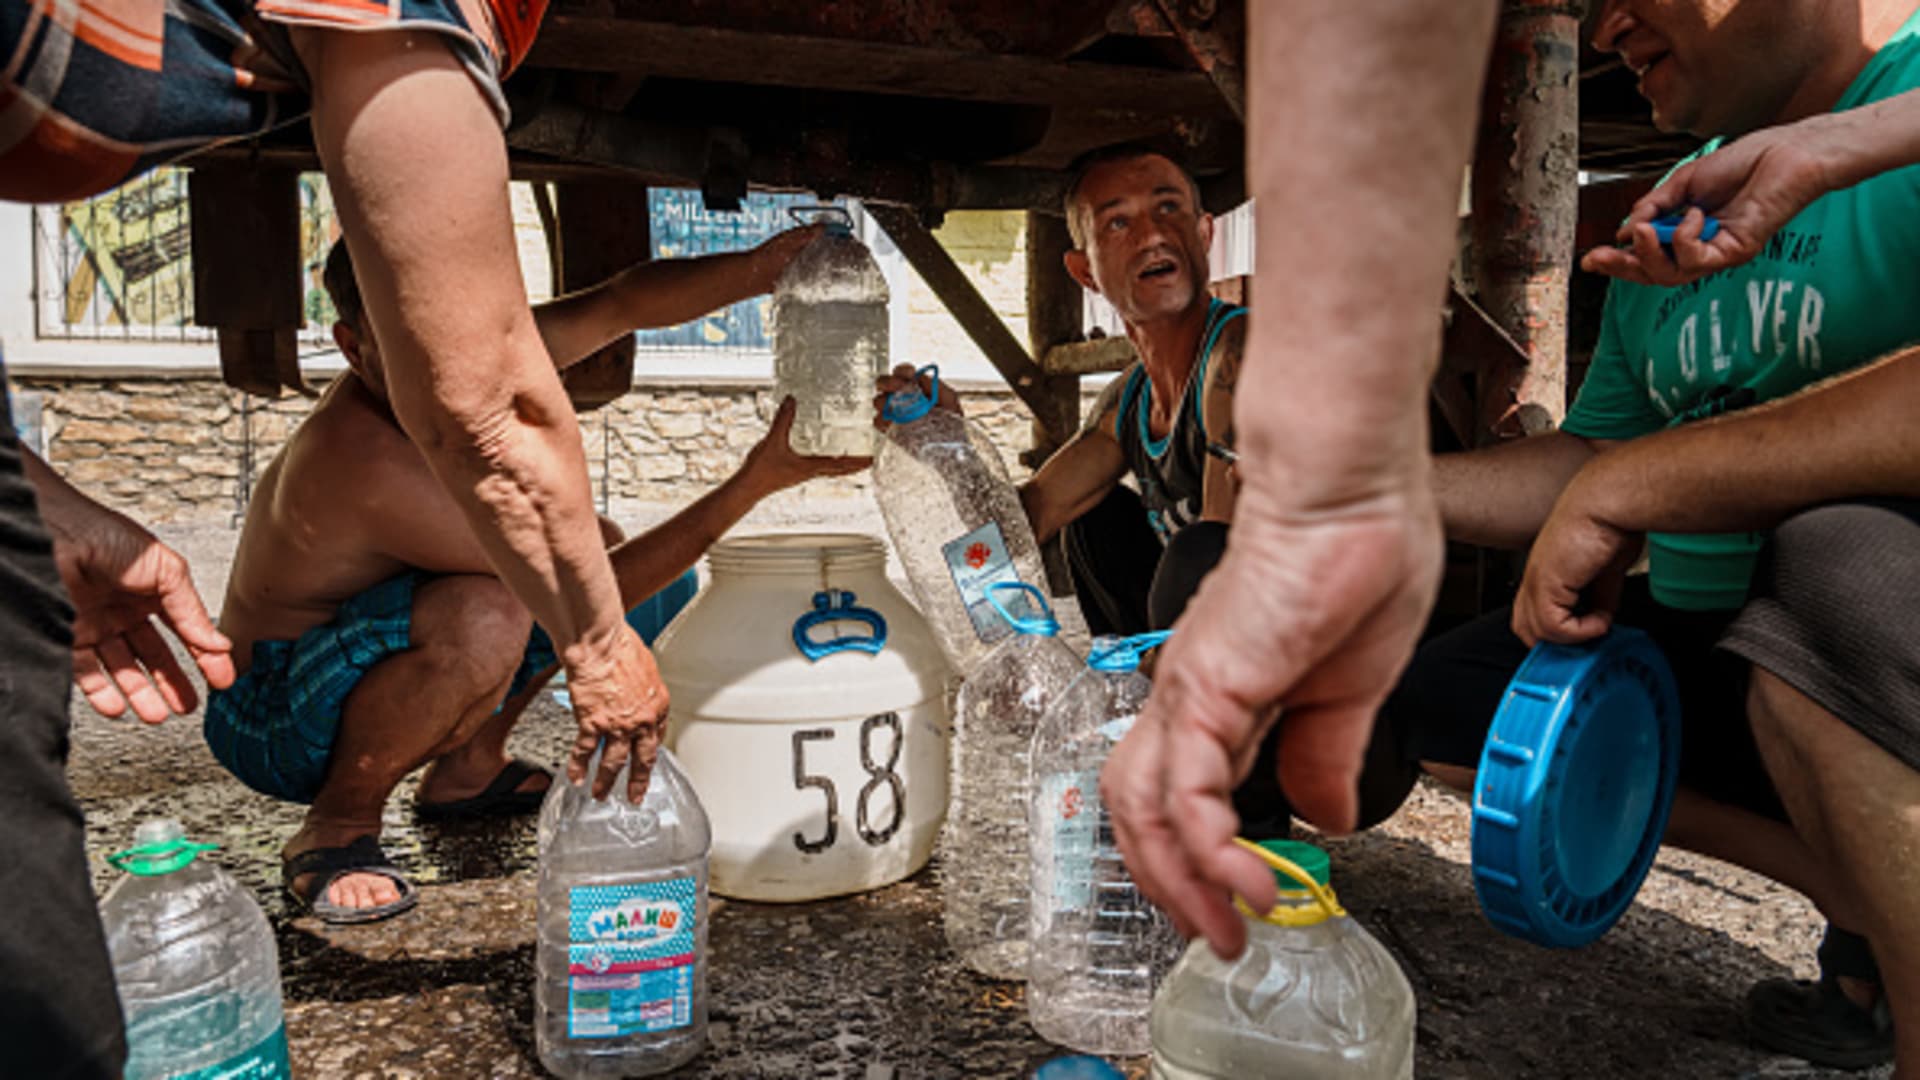 Residents go under the belly of a water truck to collect water as residents have gone without electricity and water for a whole month in Siversk, Ukraine, Sunday, June 5, 2022.